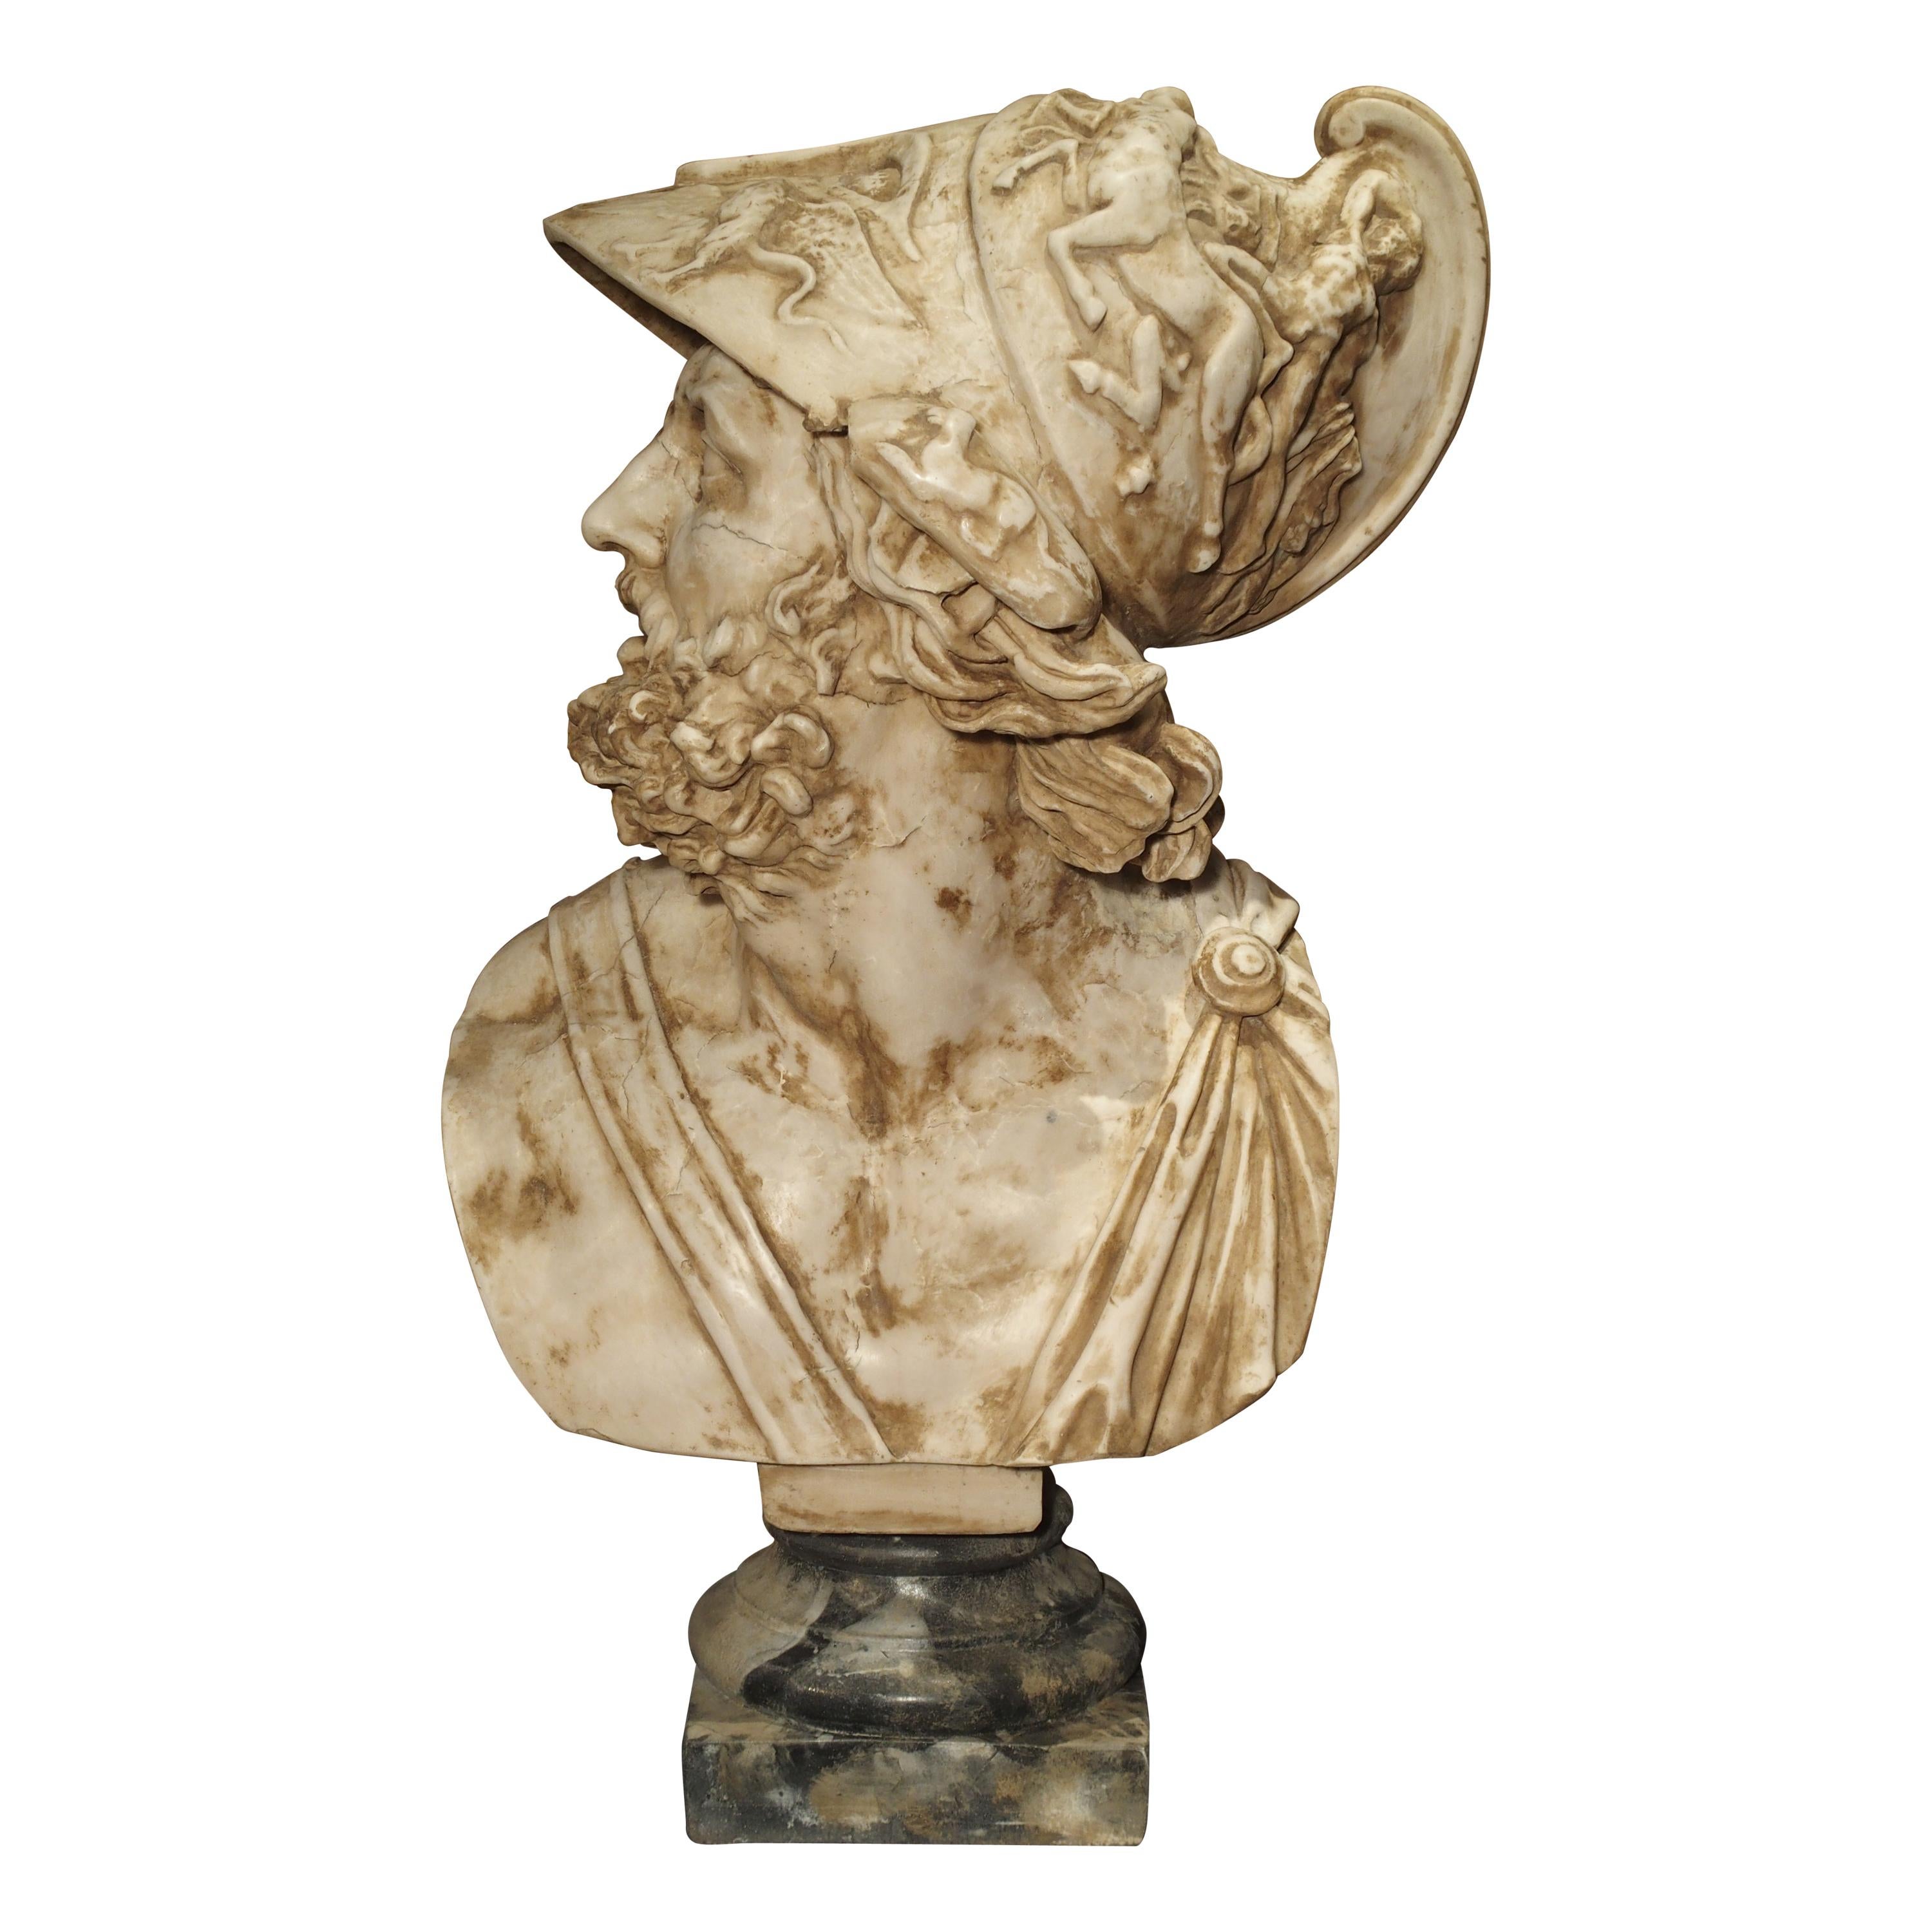 Large Italian Alabaster Bust of Menelaus, King of Sparta